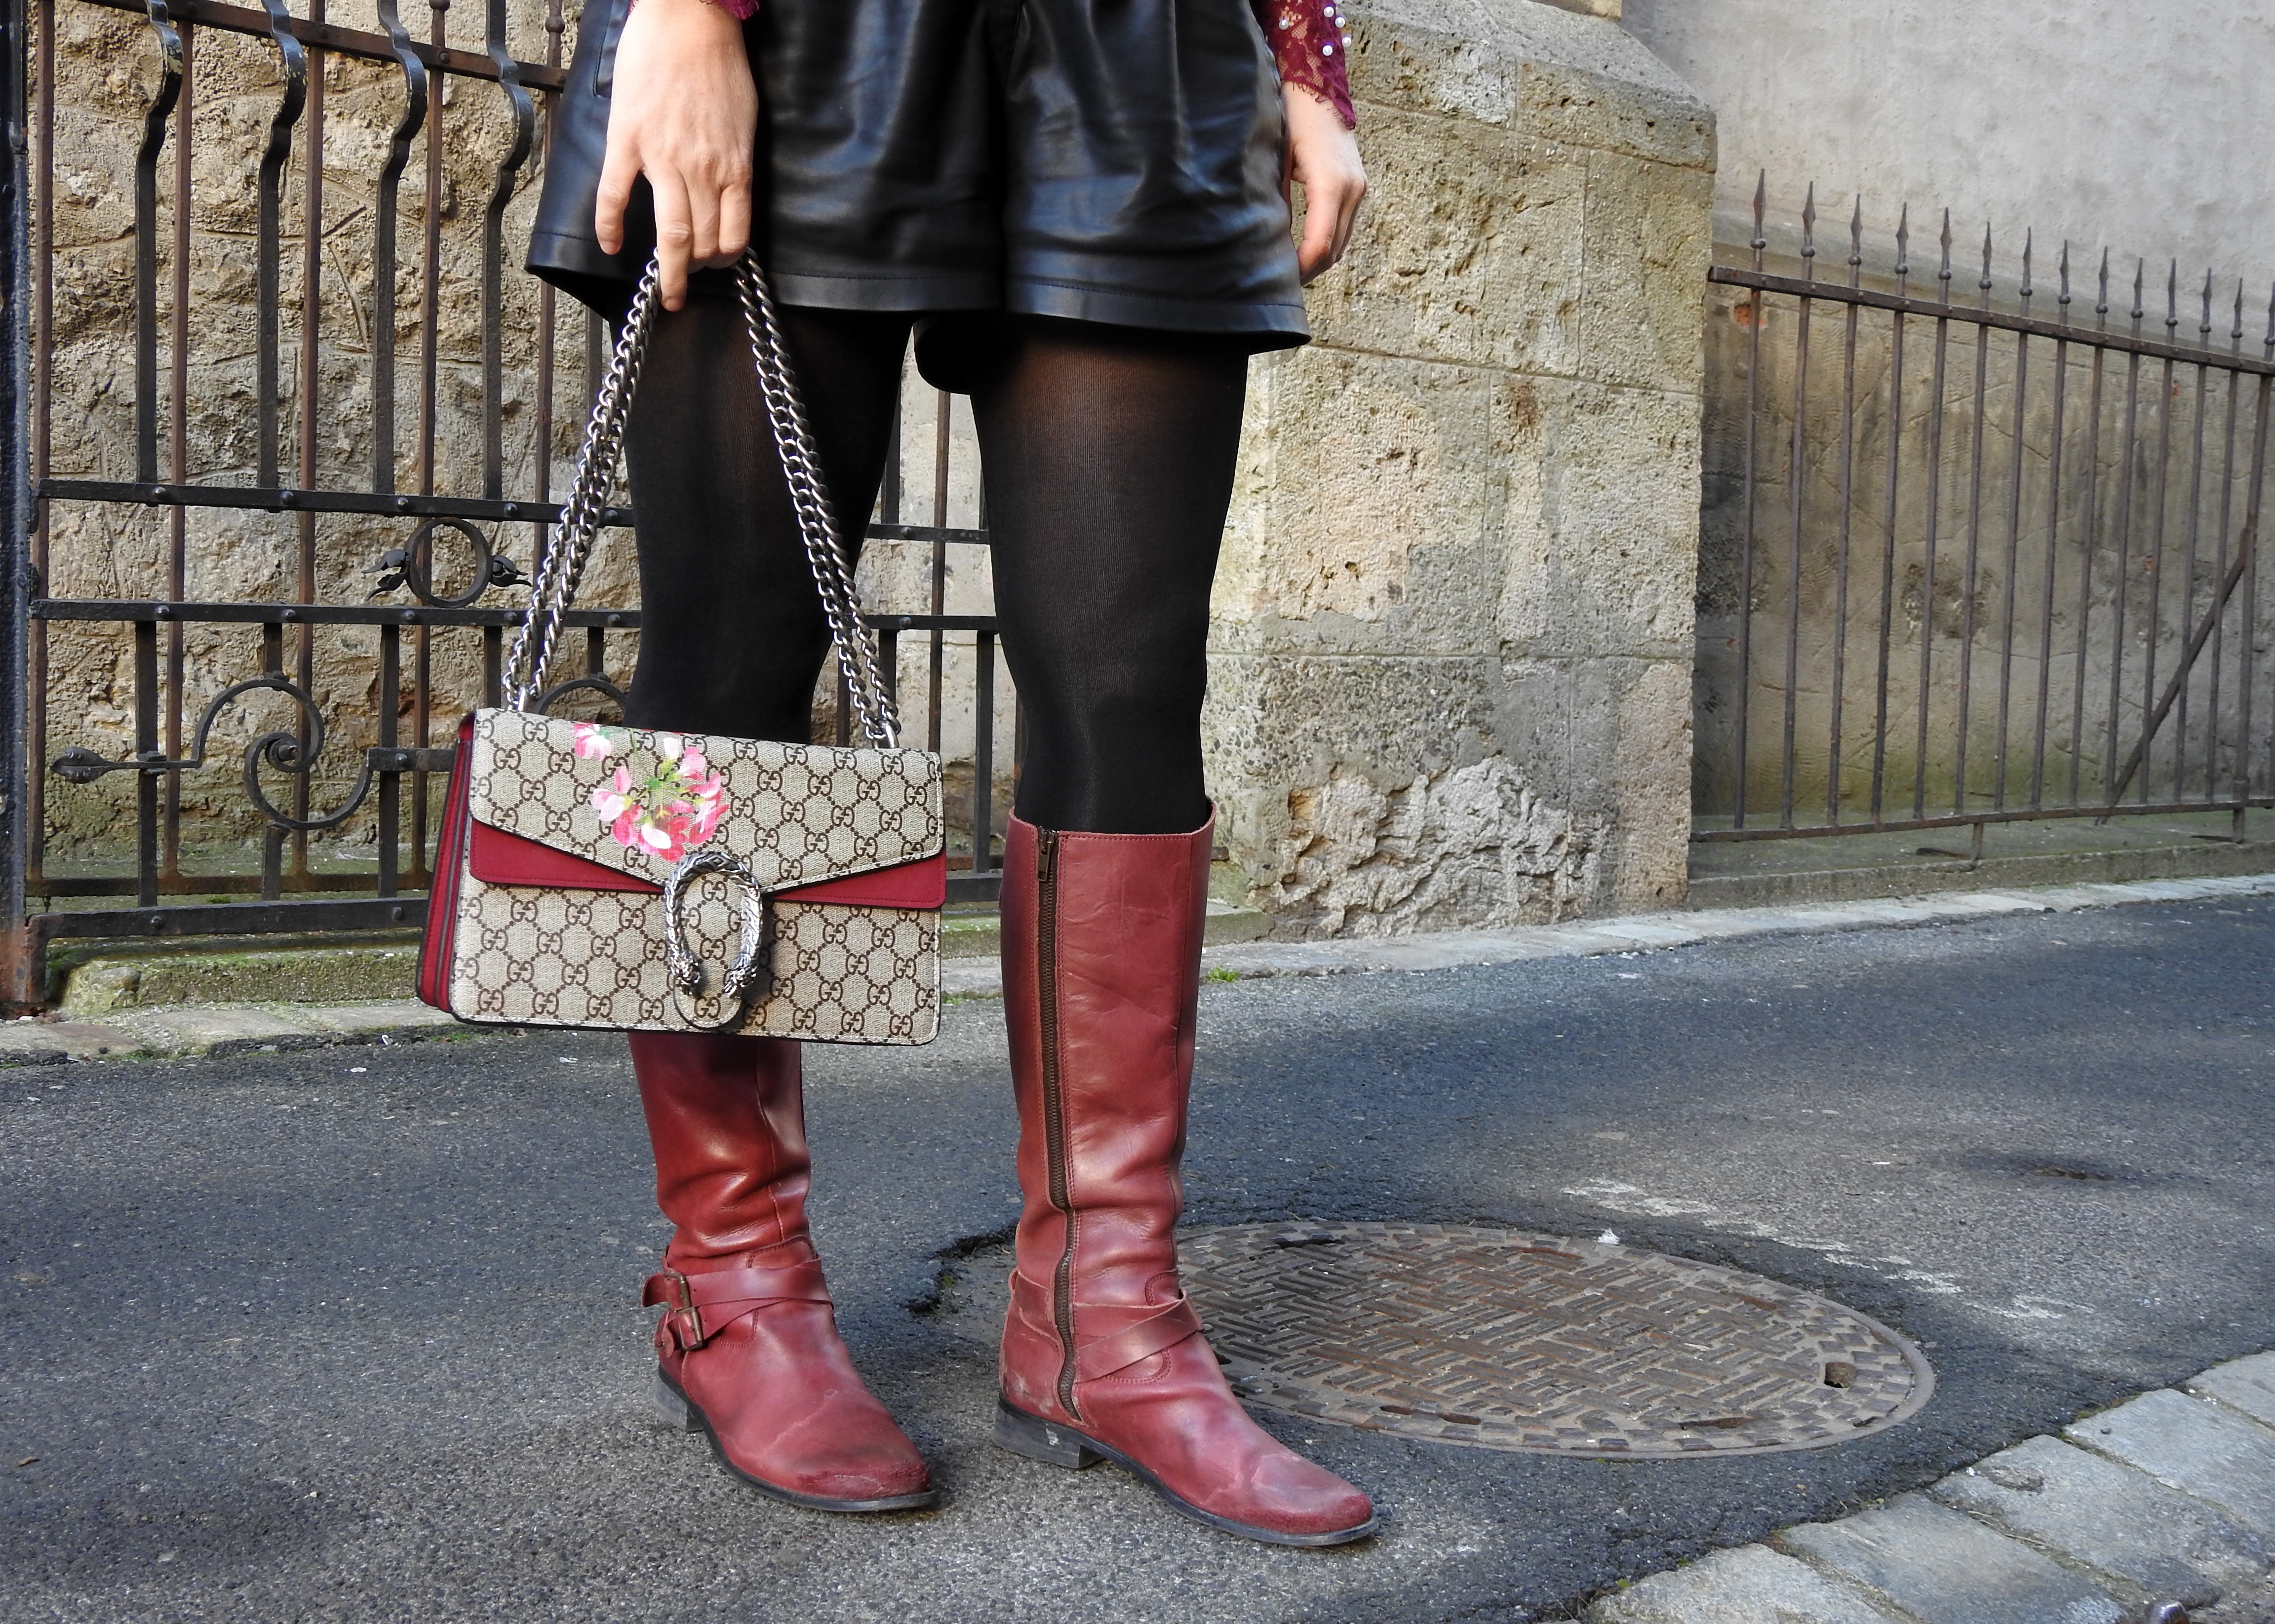 Winered-Weinrot-Gucci-Bag-Boots-Leathershorts-Pearls-Spitzentop-Lacetop-carrieslifestyle-Tamara-Prutsch